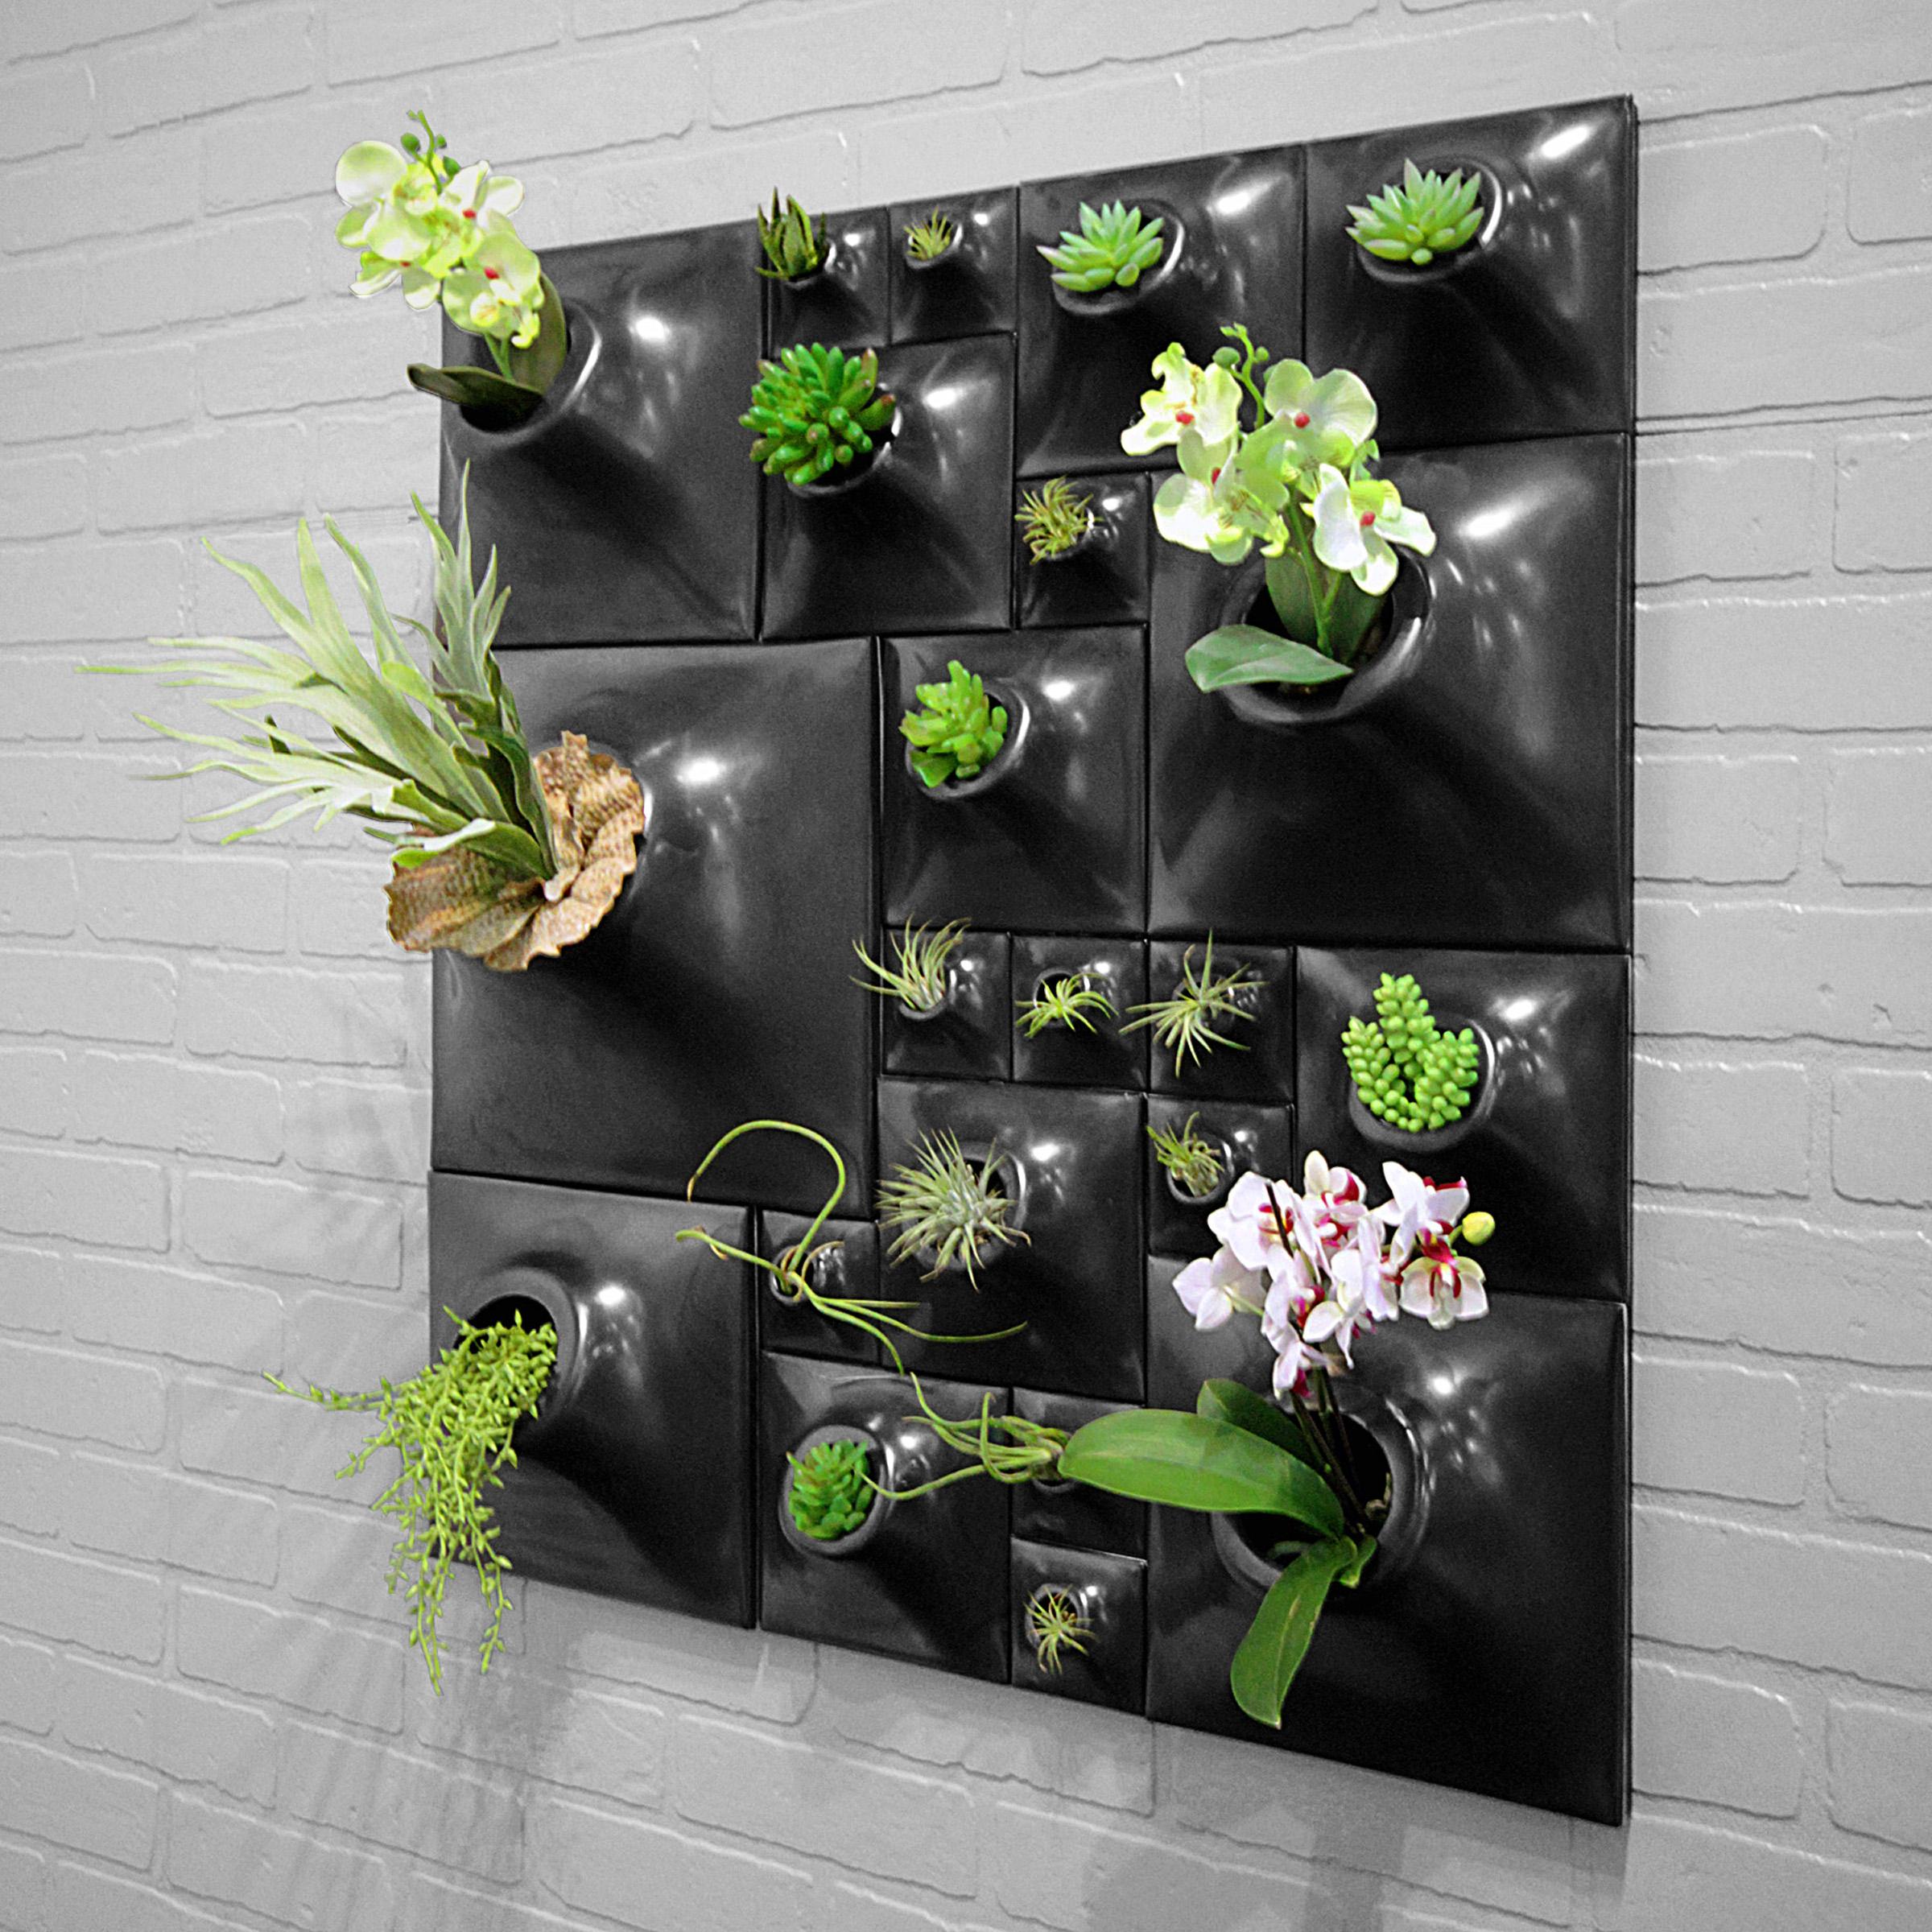 Modern Ceramic Greenwall - Living Wall Decor - Plant Wall - Price per sq ft For Sale 7